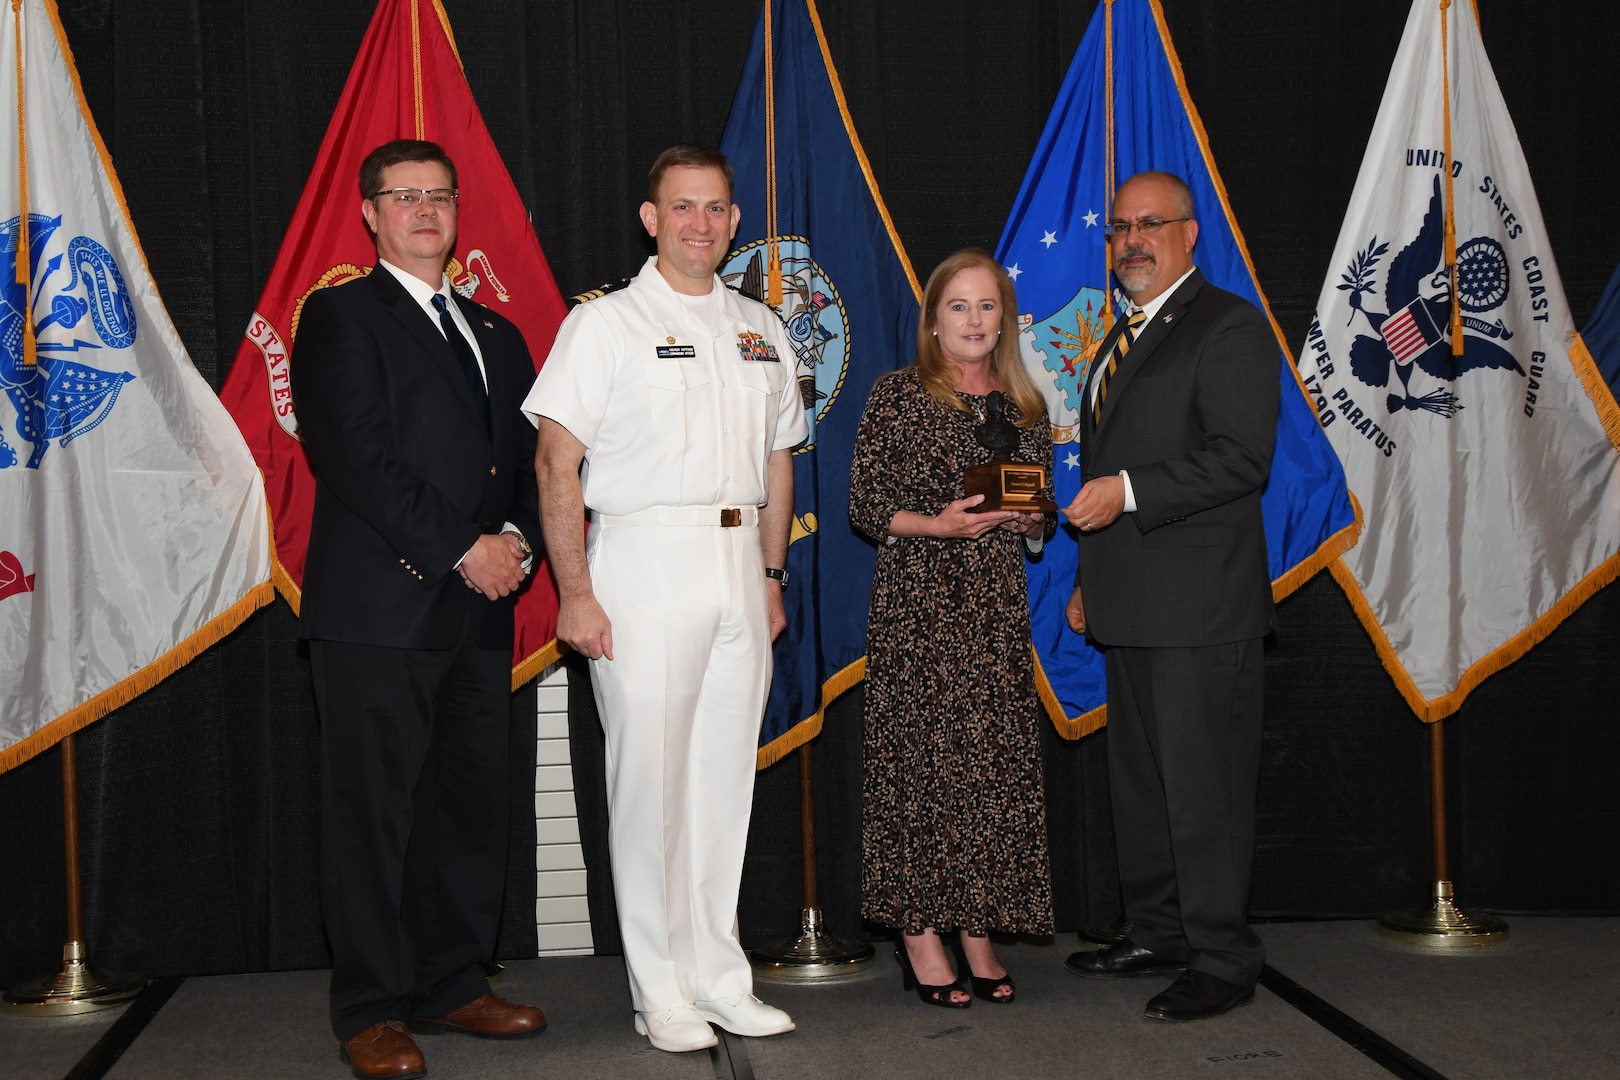 IMAGE: Denise Bagnall is presented the John Adolphus Dahlgren Award at Naval Surface Warfare Center Dahlgren Division's annual awards ceremony, Apr. 26 at the Fredericksburg Expo and Conference Center.

The Dahlgren Award is named for Rear Adm. John A. Dahlgren – who is considered the "Father of Modern Naval Ordnance" - and honors individuals with significant achievement in science, engineering or management.